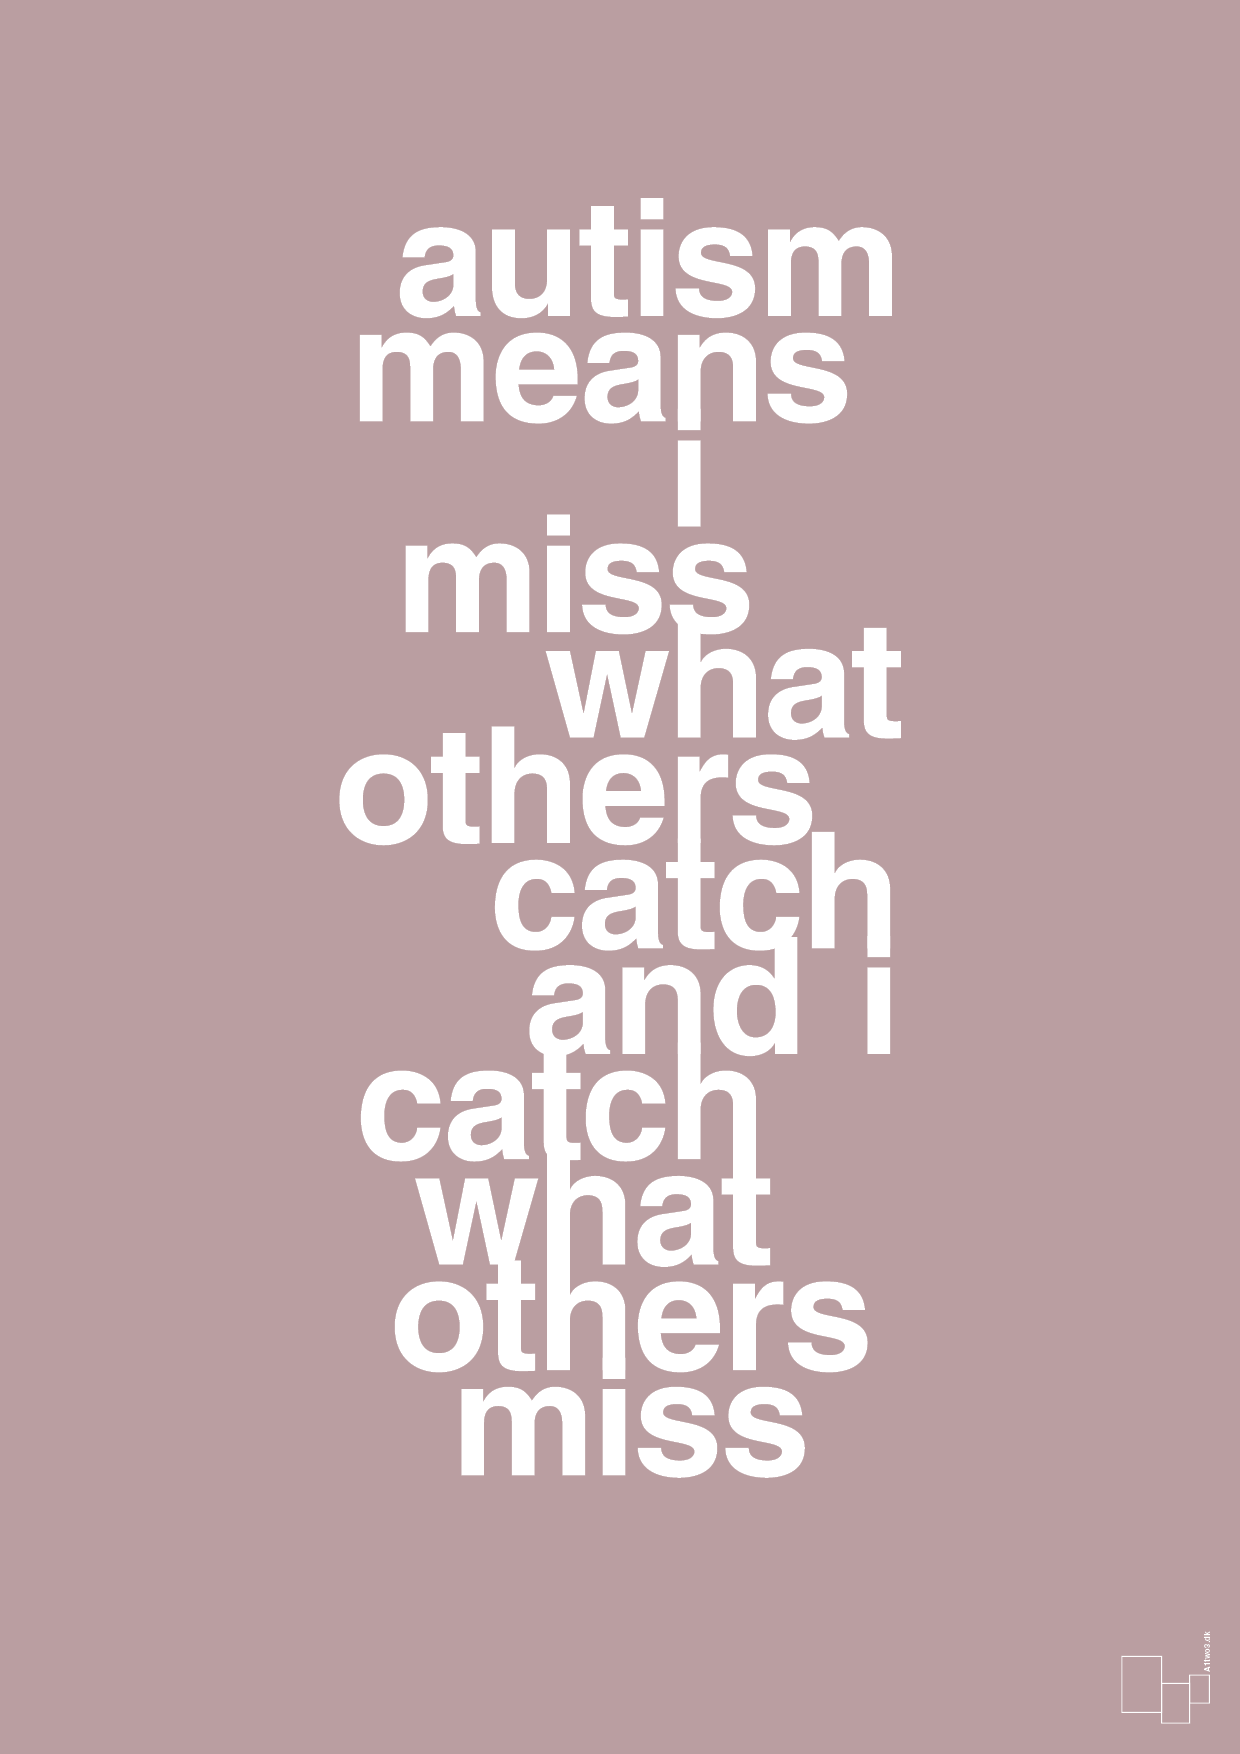 autism means i miss what others catch and i catch what others miss - Plakat med Samfund i Light Rose